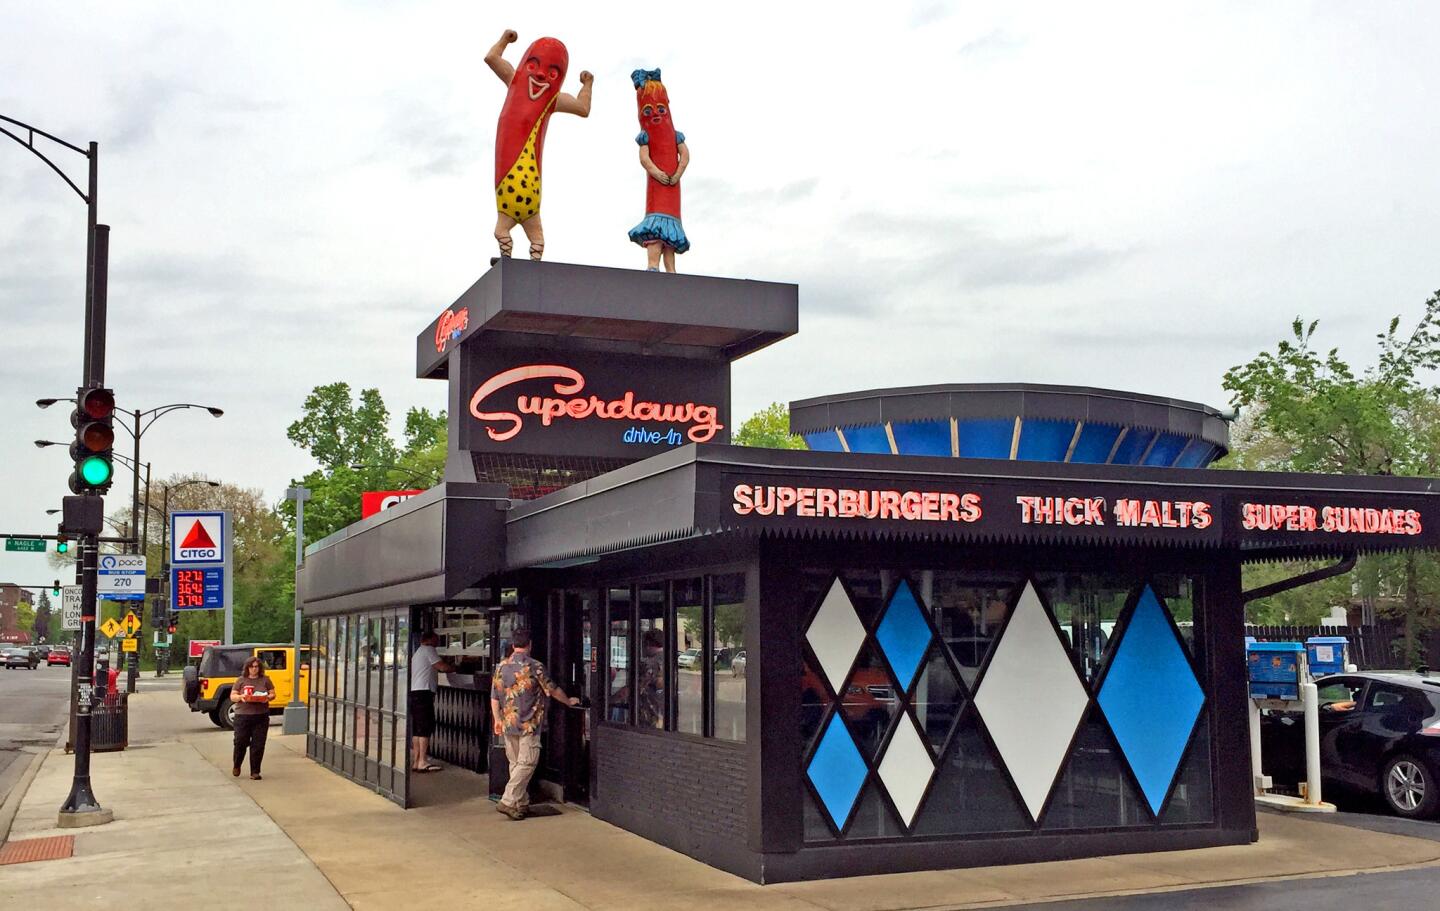 Maurie and Flaurie Berman established Superdawg in 1948. Their secret recipe isn't a wiener, or a frankfurter, or a red hot ... it's a Superdawg.